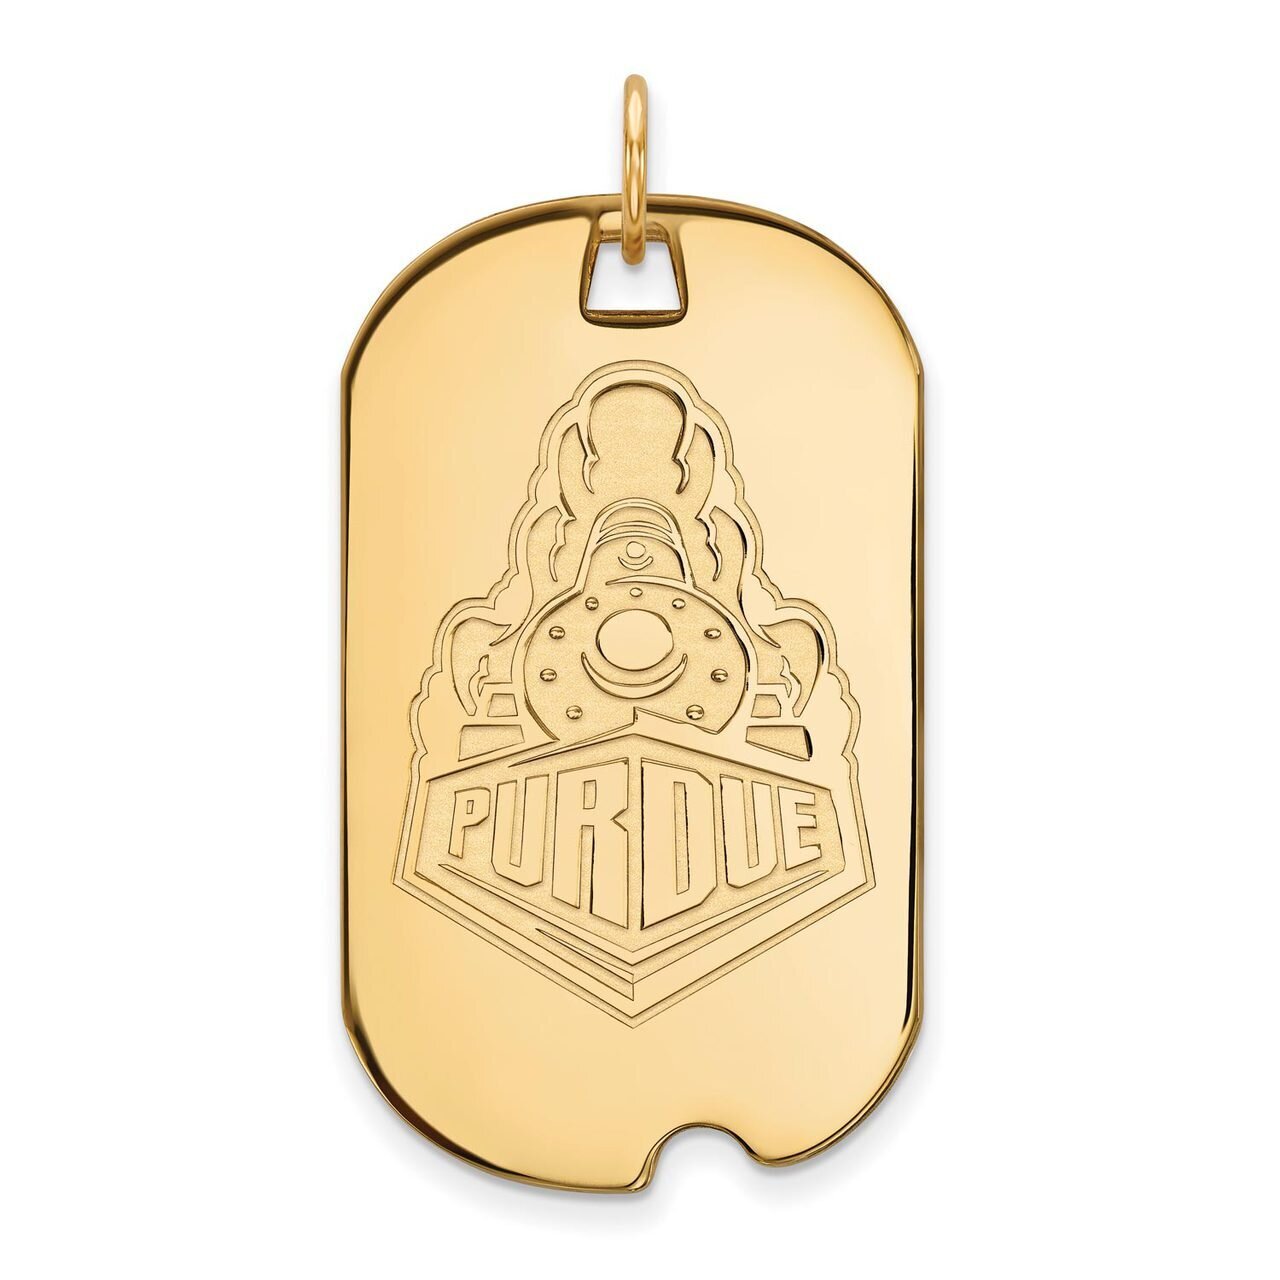 Purdue Large Dog Tag Gold-plated Silver GP057PU